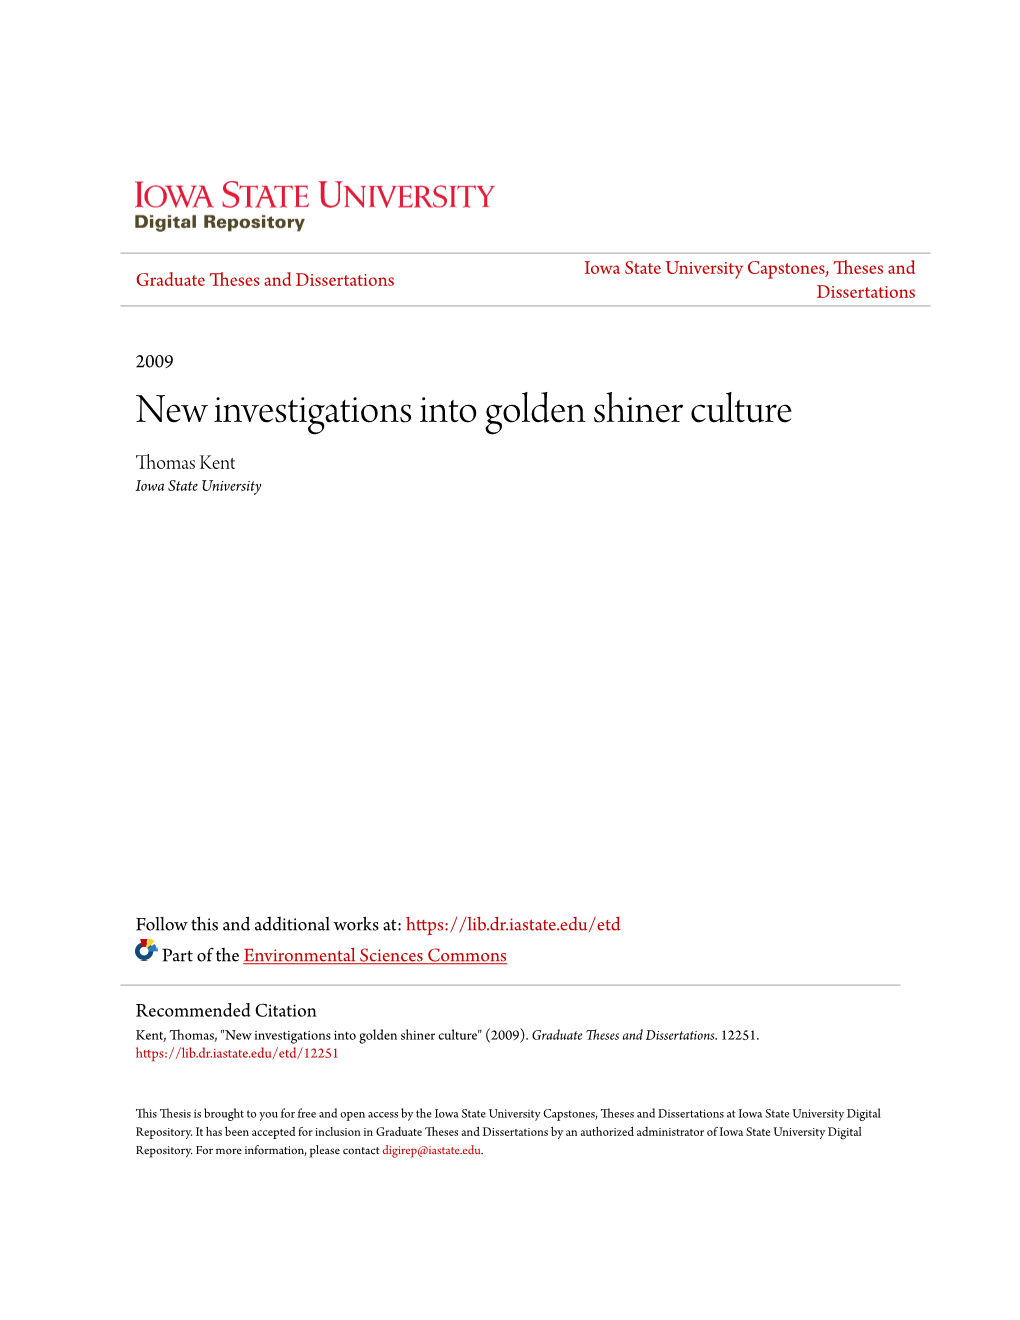 New Investigations Into Golden Shiner Culture Thomas Kent Iowa State University